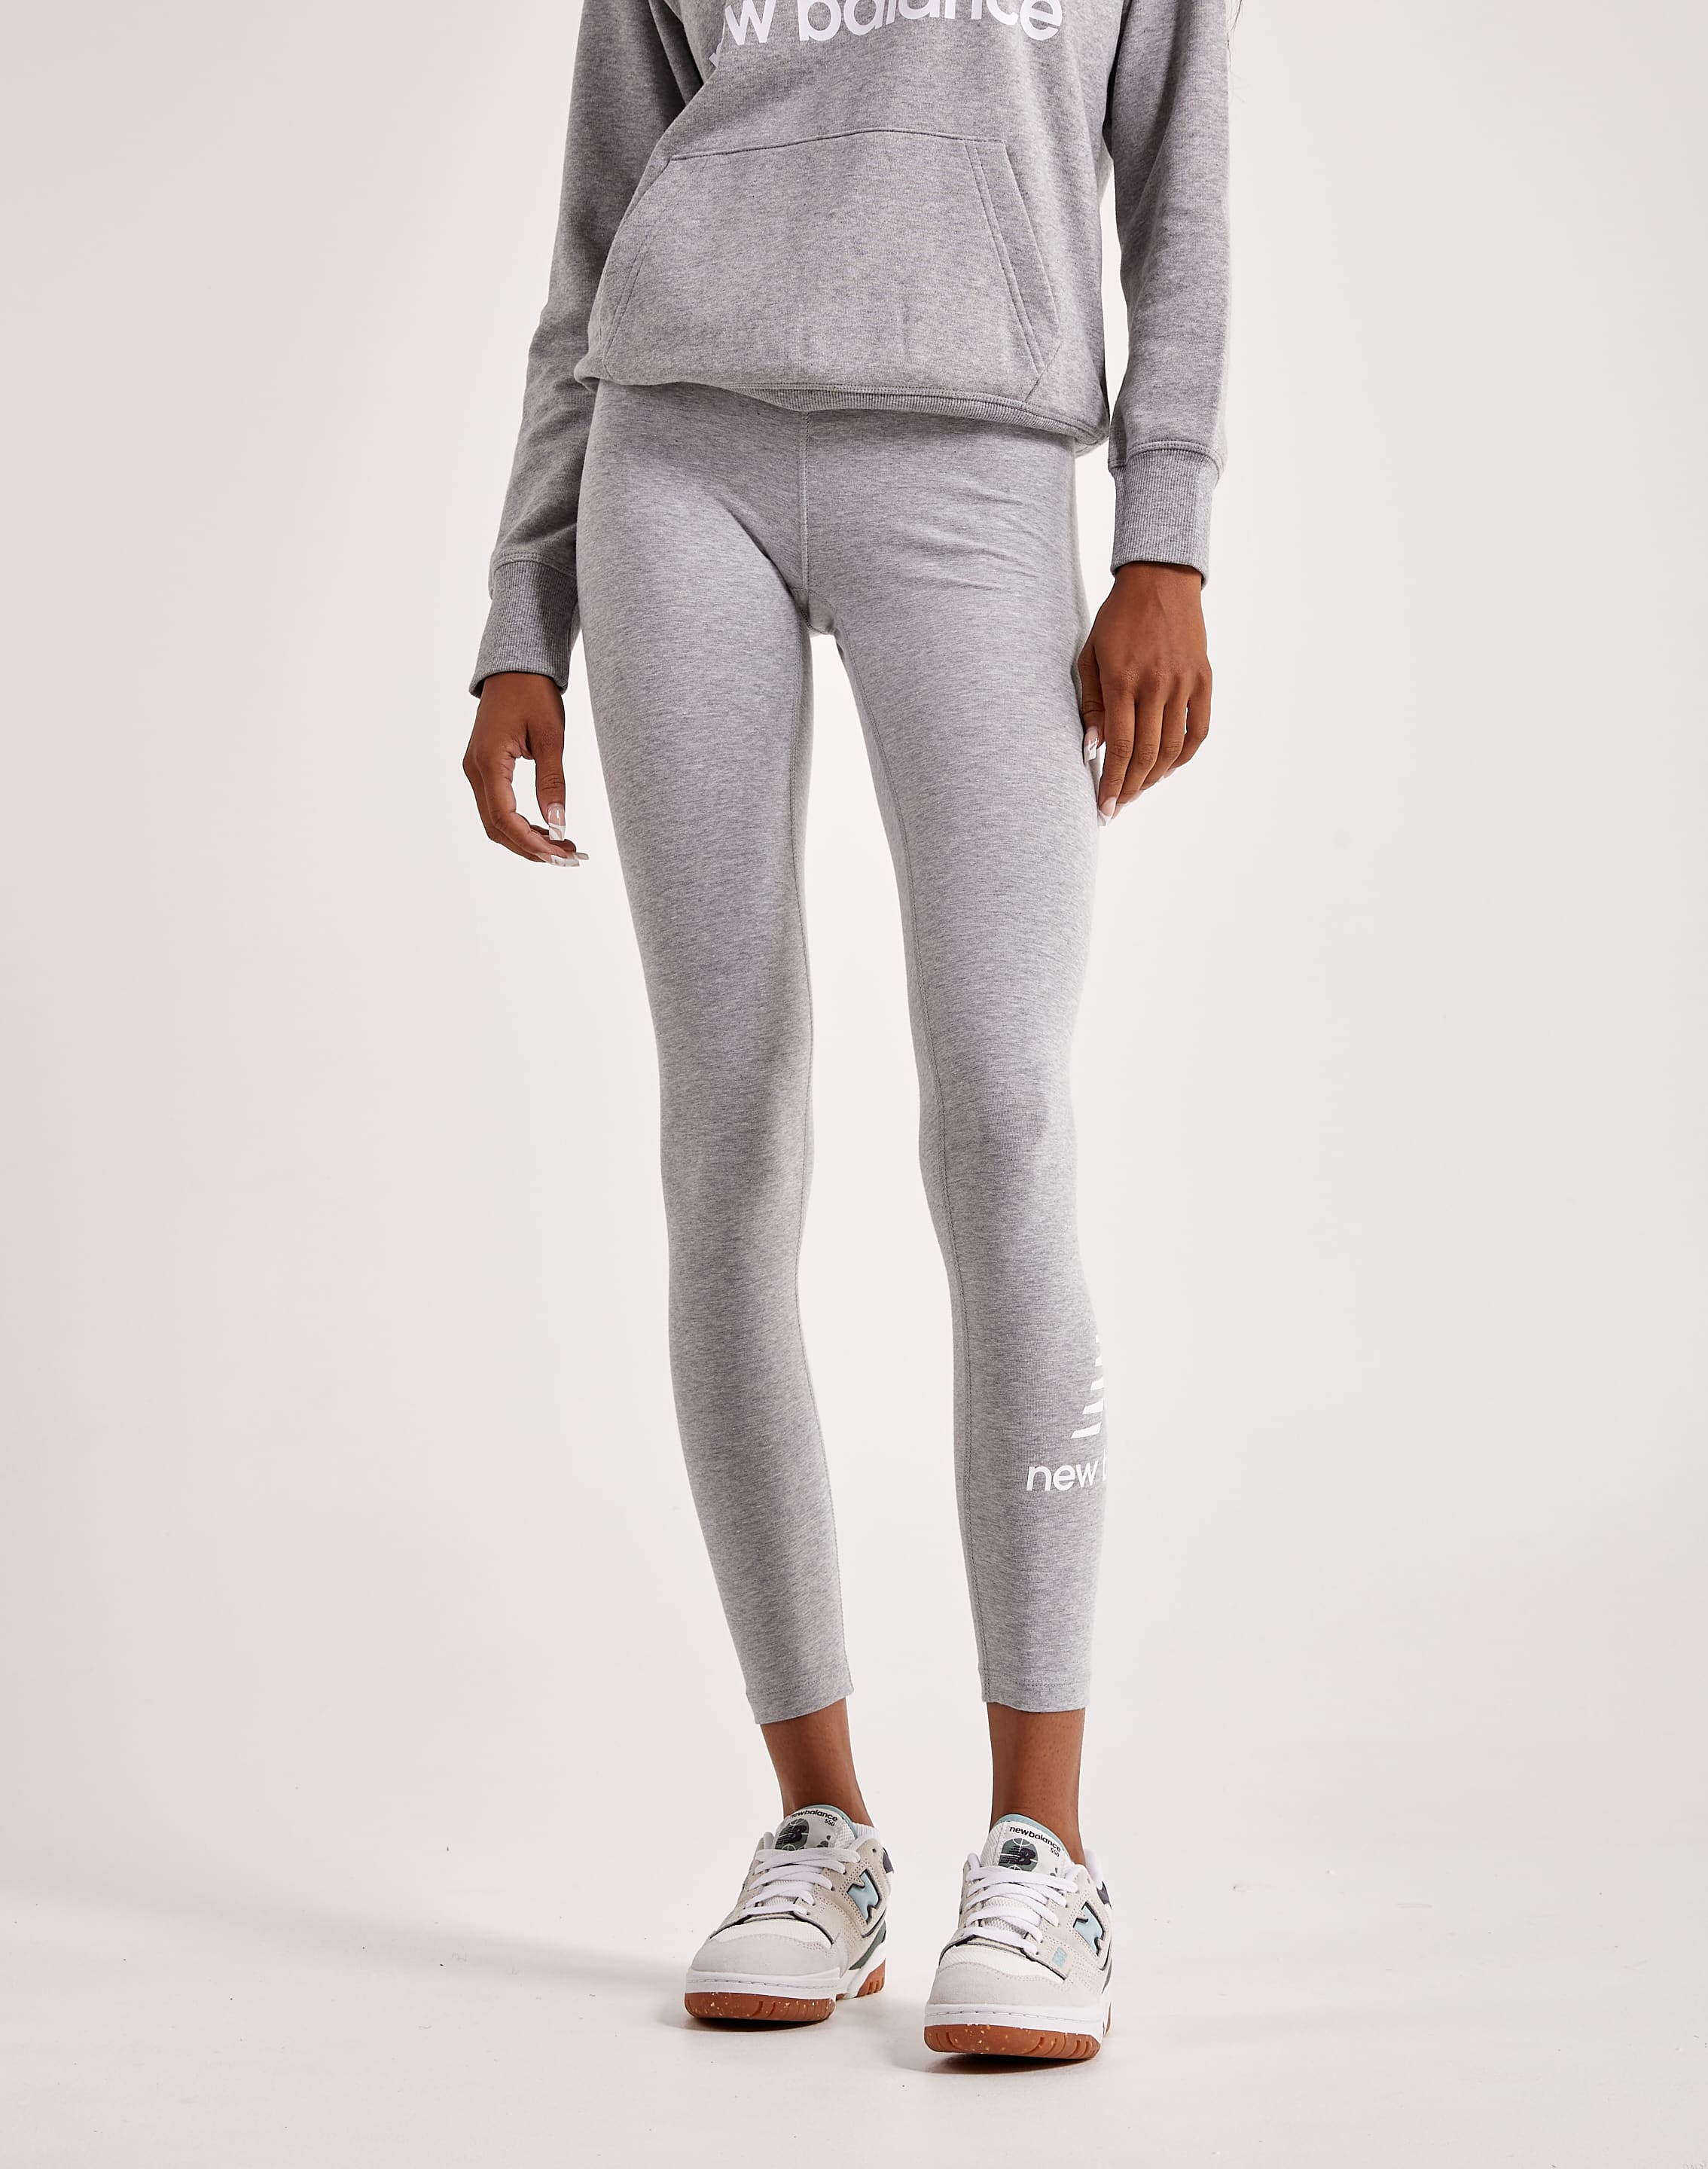 New Balance Essentials Stacked Leggings